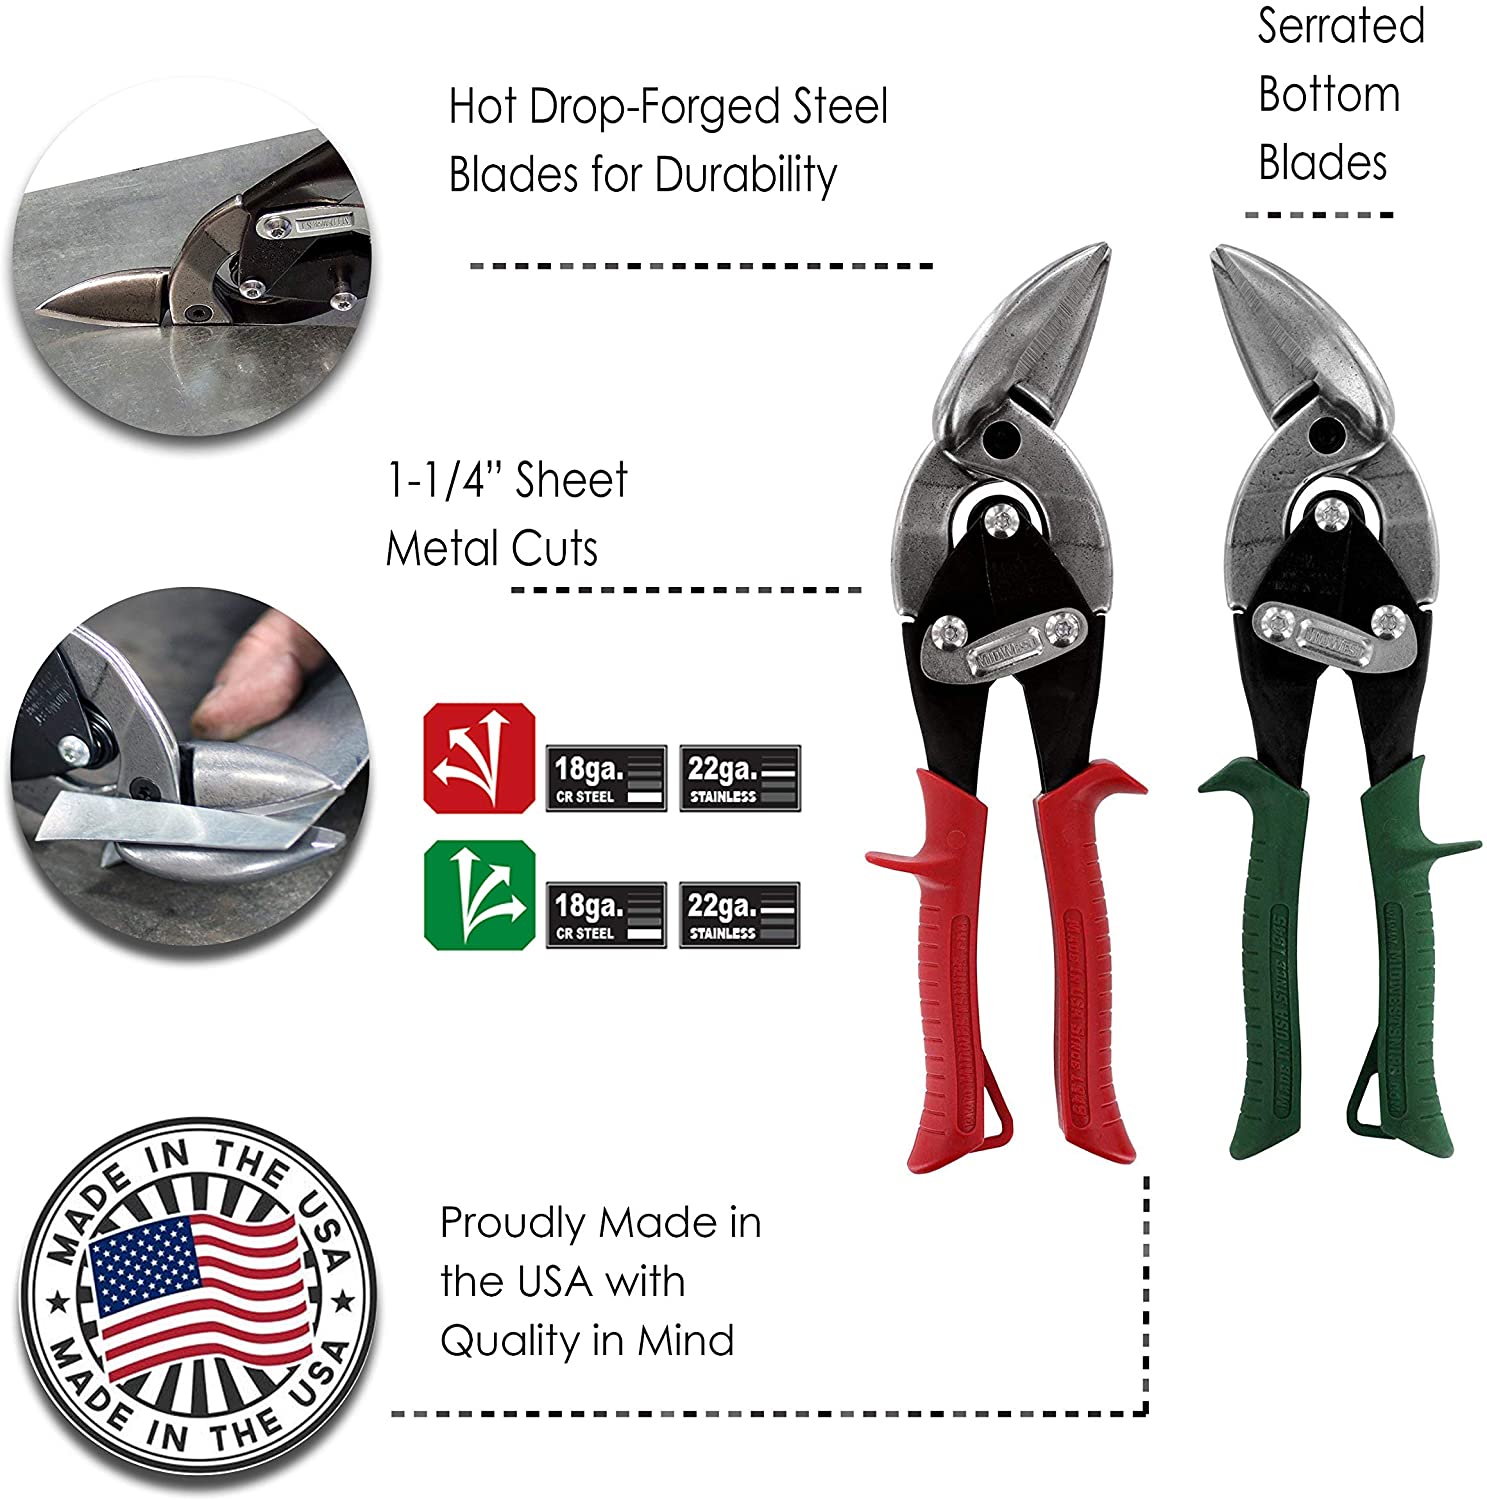 MIDWEST Aviation Tin Snips - Offset Tin Cutting Shears